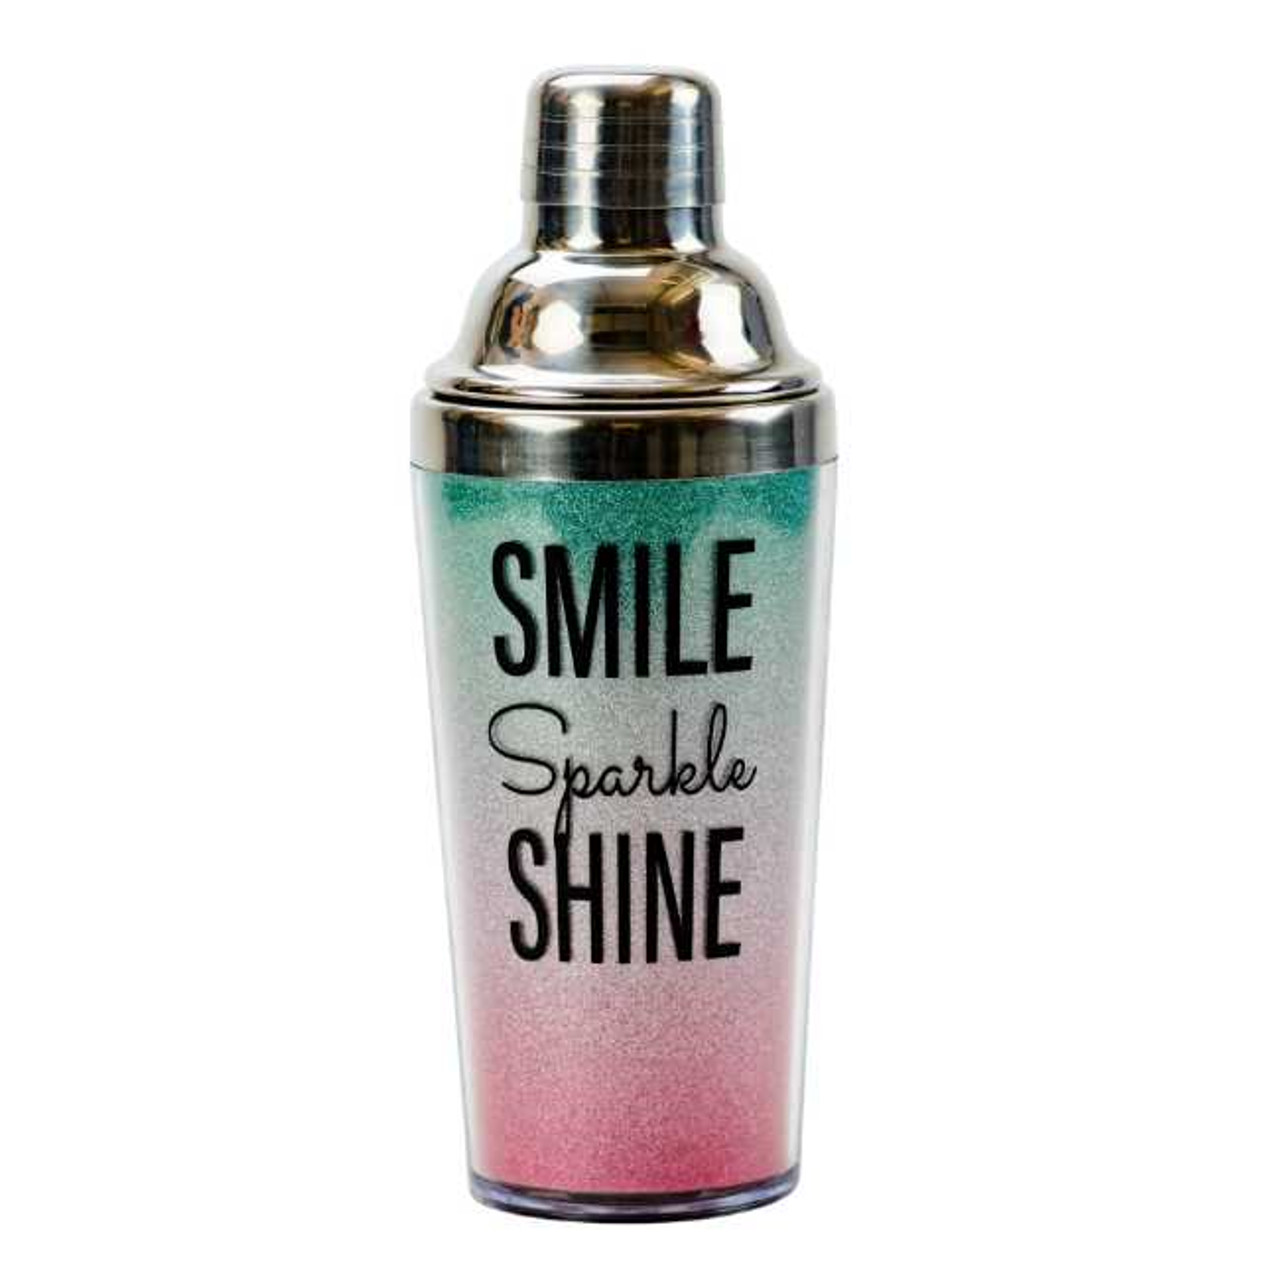 Cantini Smile Sparkle Shine Insulated Ombre Cocktail Shaker